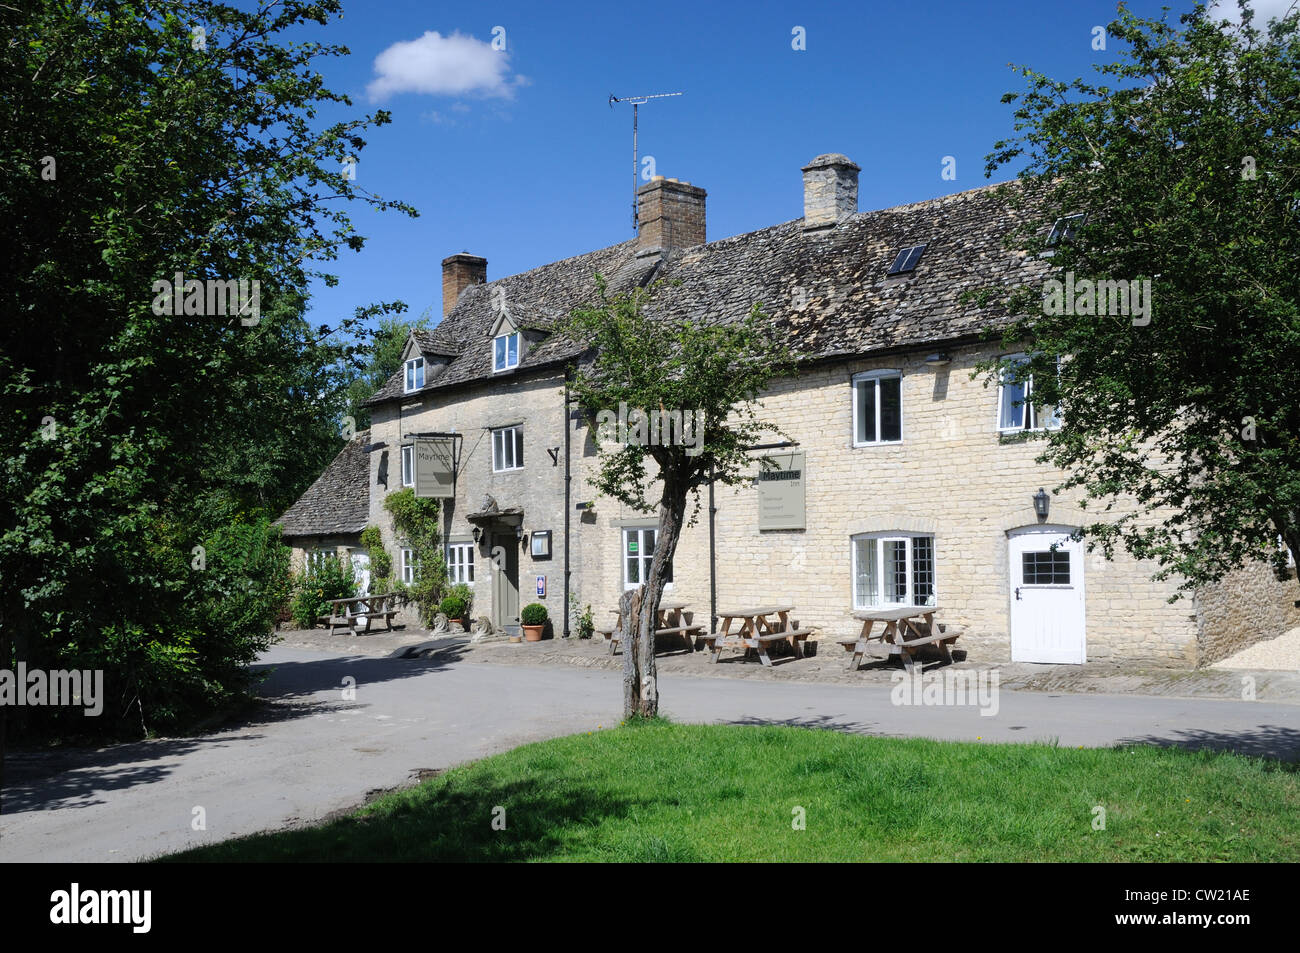 The Maytime Inn, in Asthall, Oxfordshire, England Stock Photo